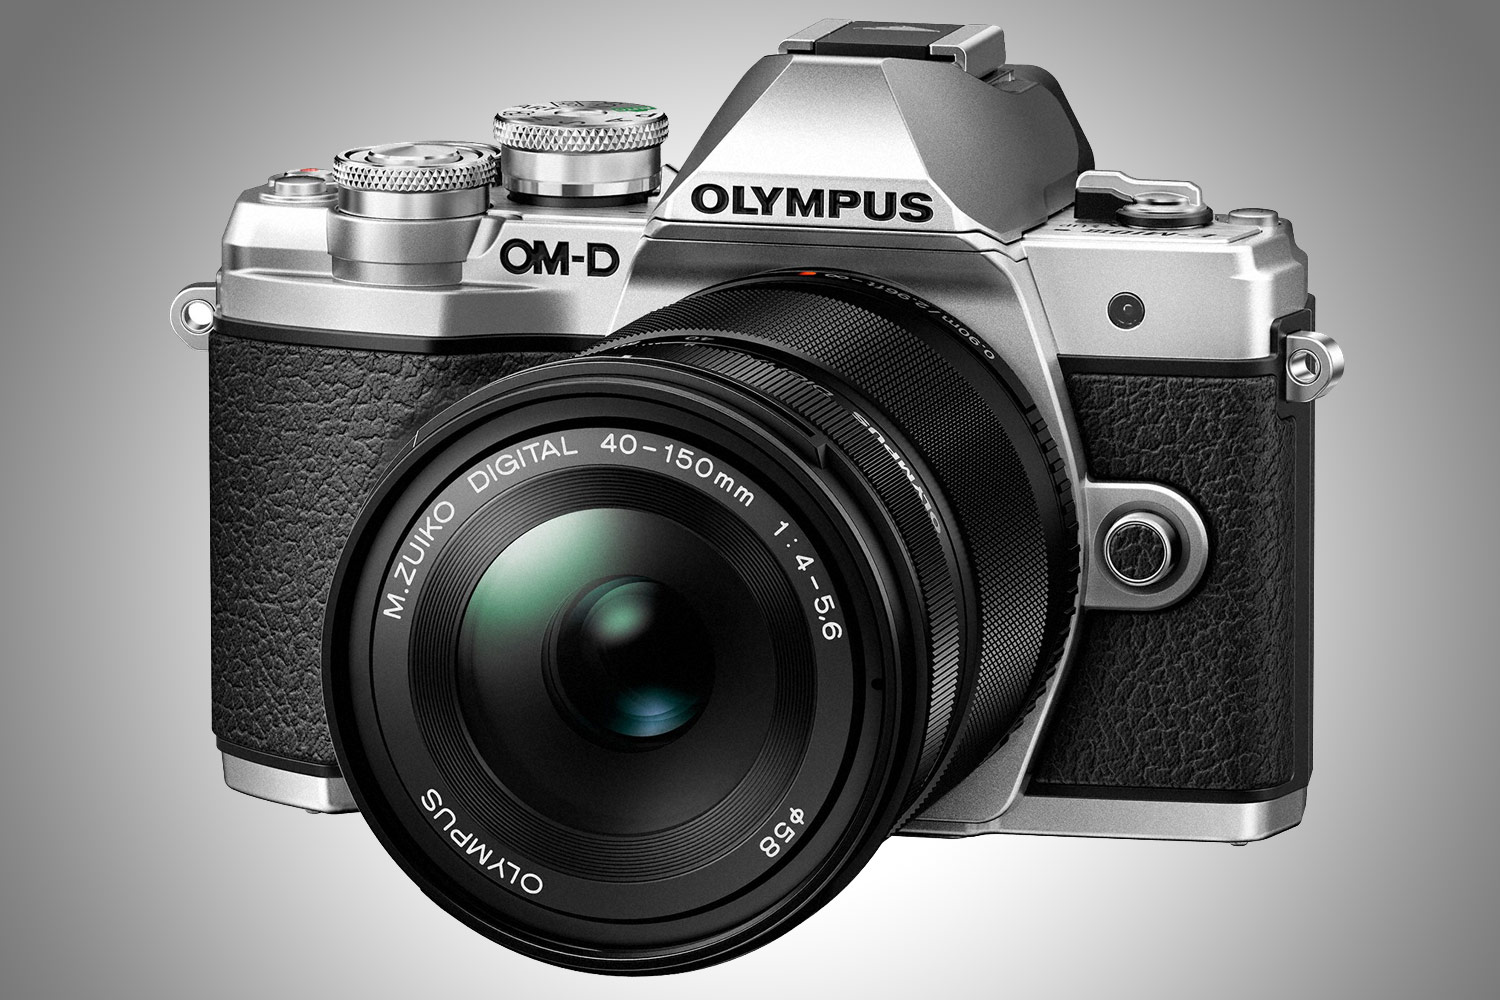 4K Video Comes to Entry-Level Olympus OM-D E-M10 Mark III